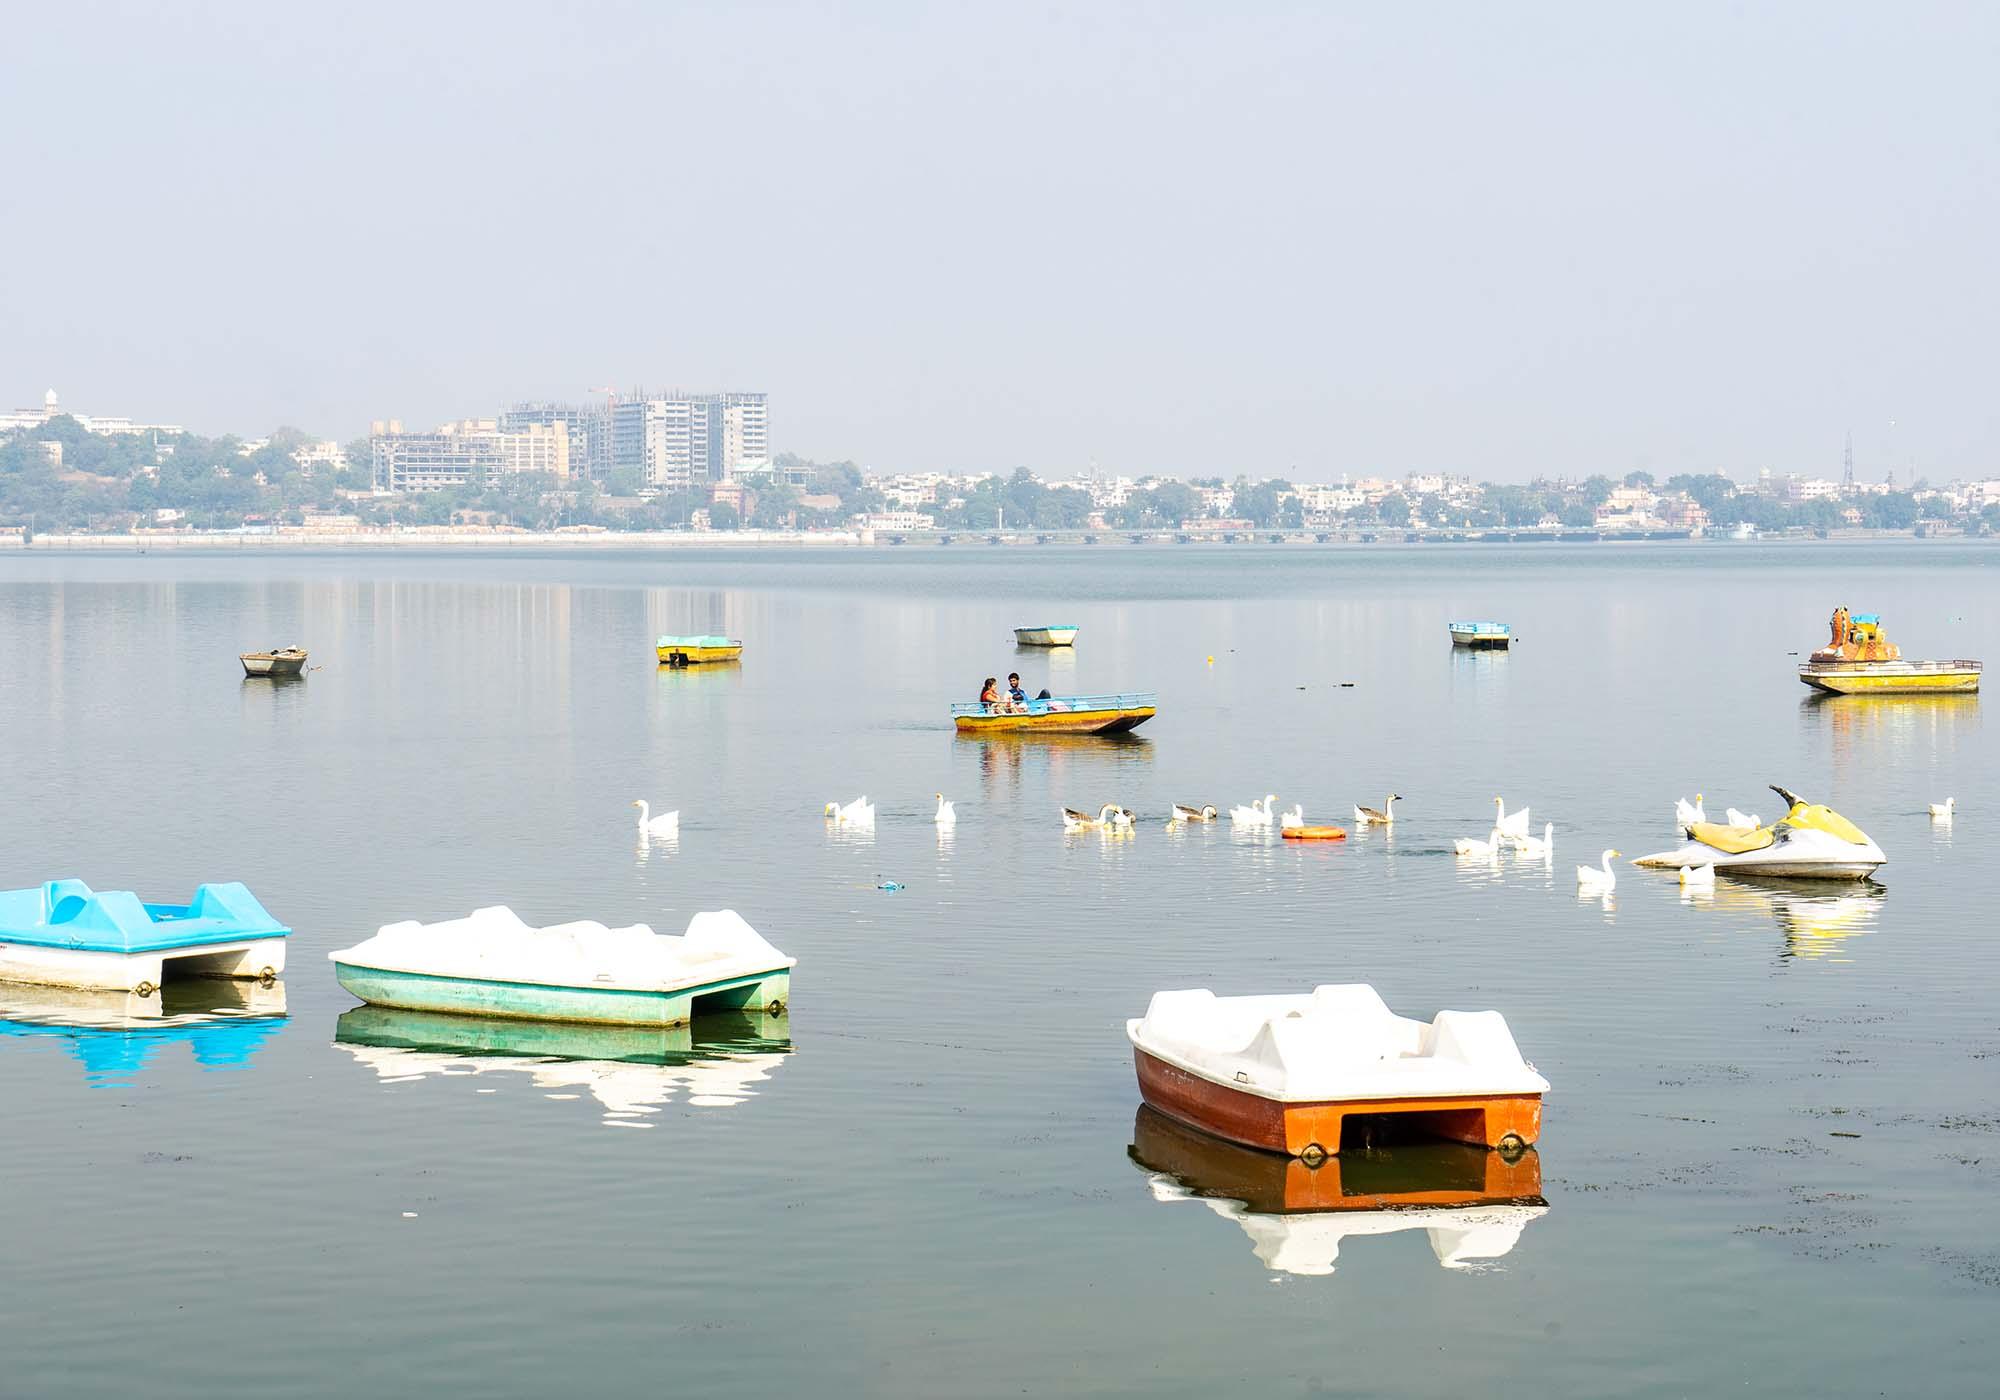 Paddle boats for hire from the Boat Club on the Upper Lake in Bhopal. – © Michael Turtle